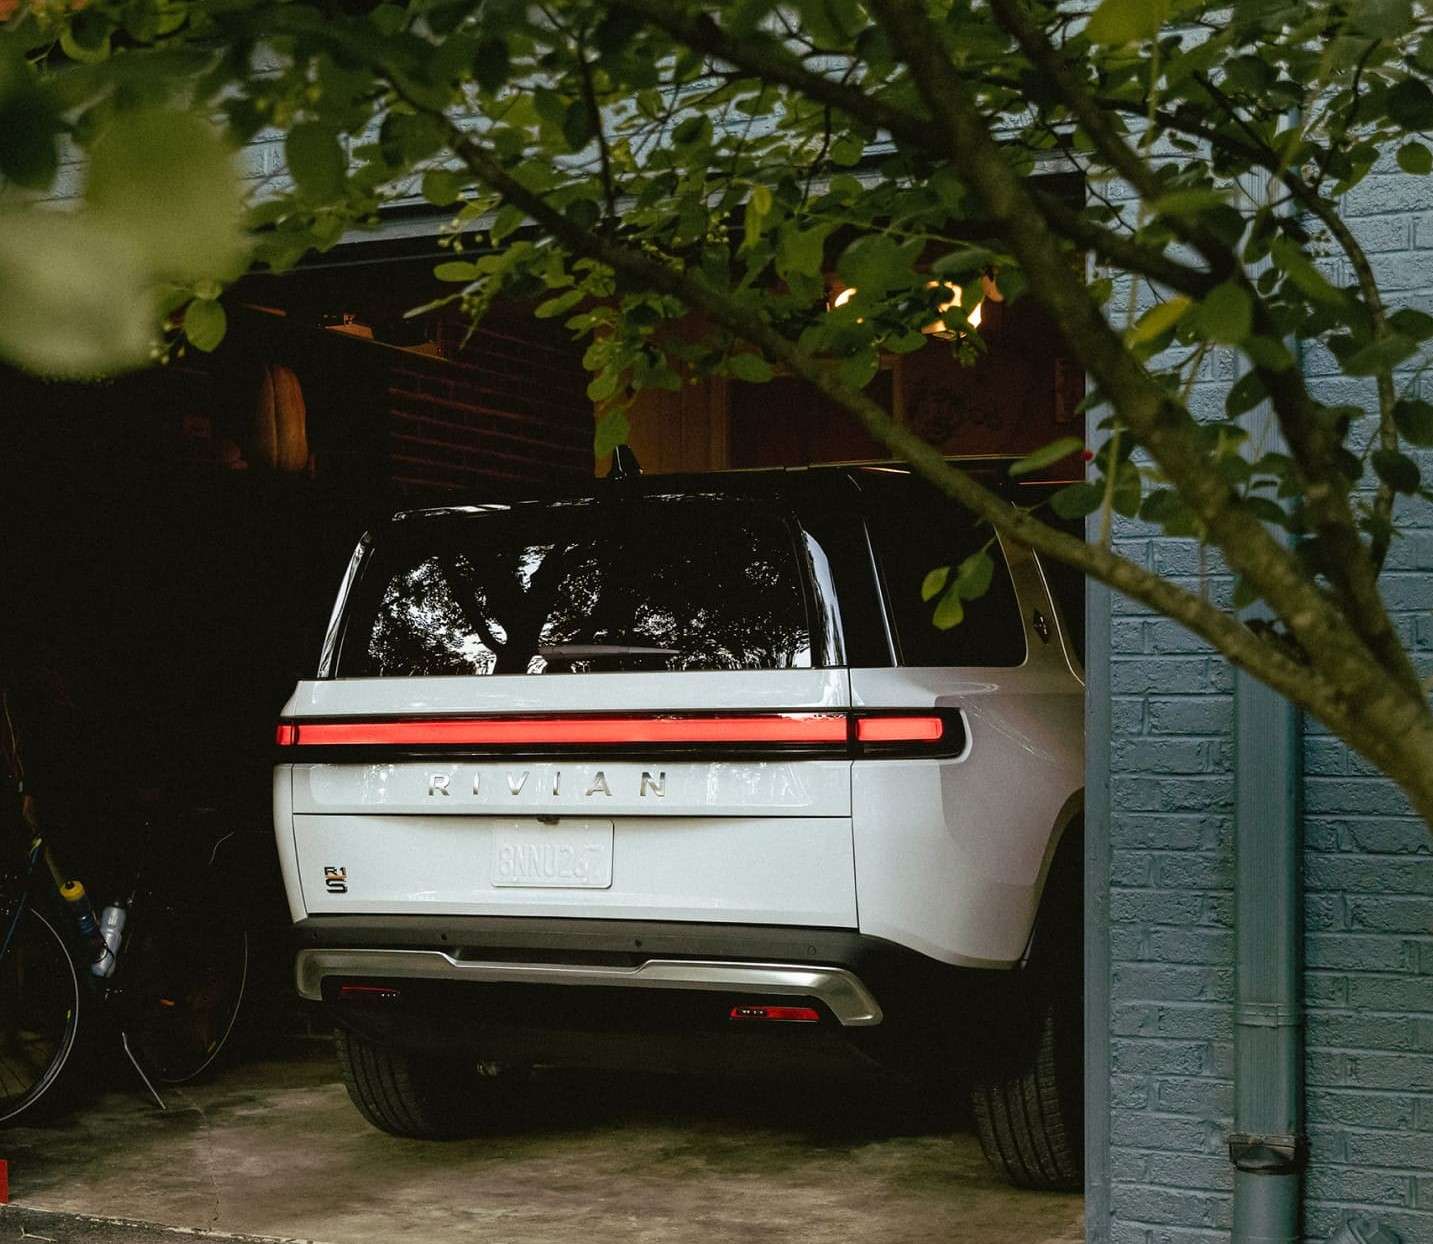 Rivian electric vehicle parked in garage